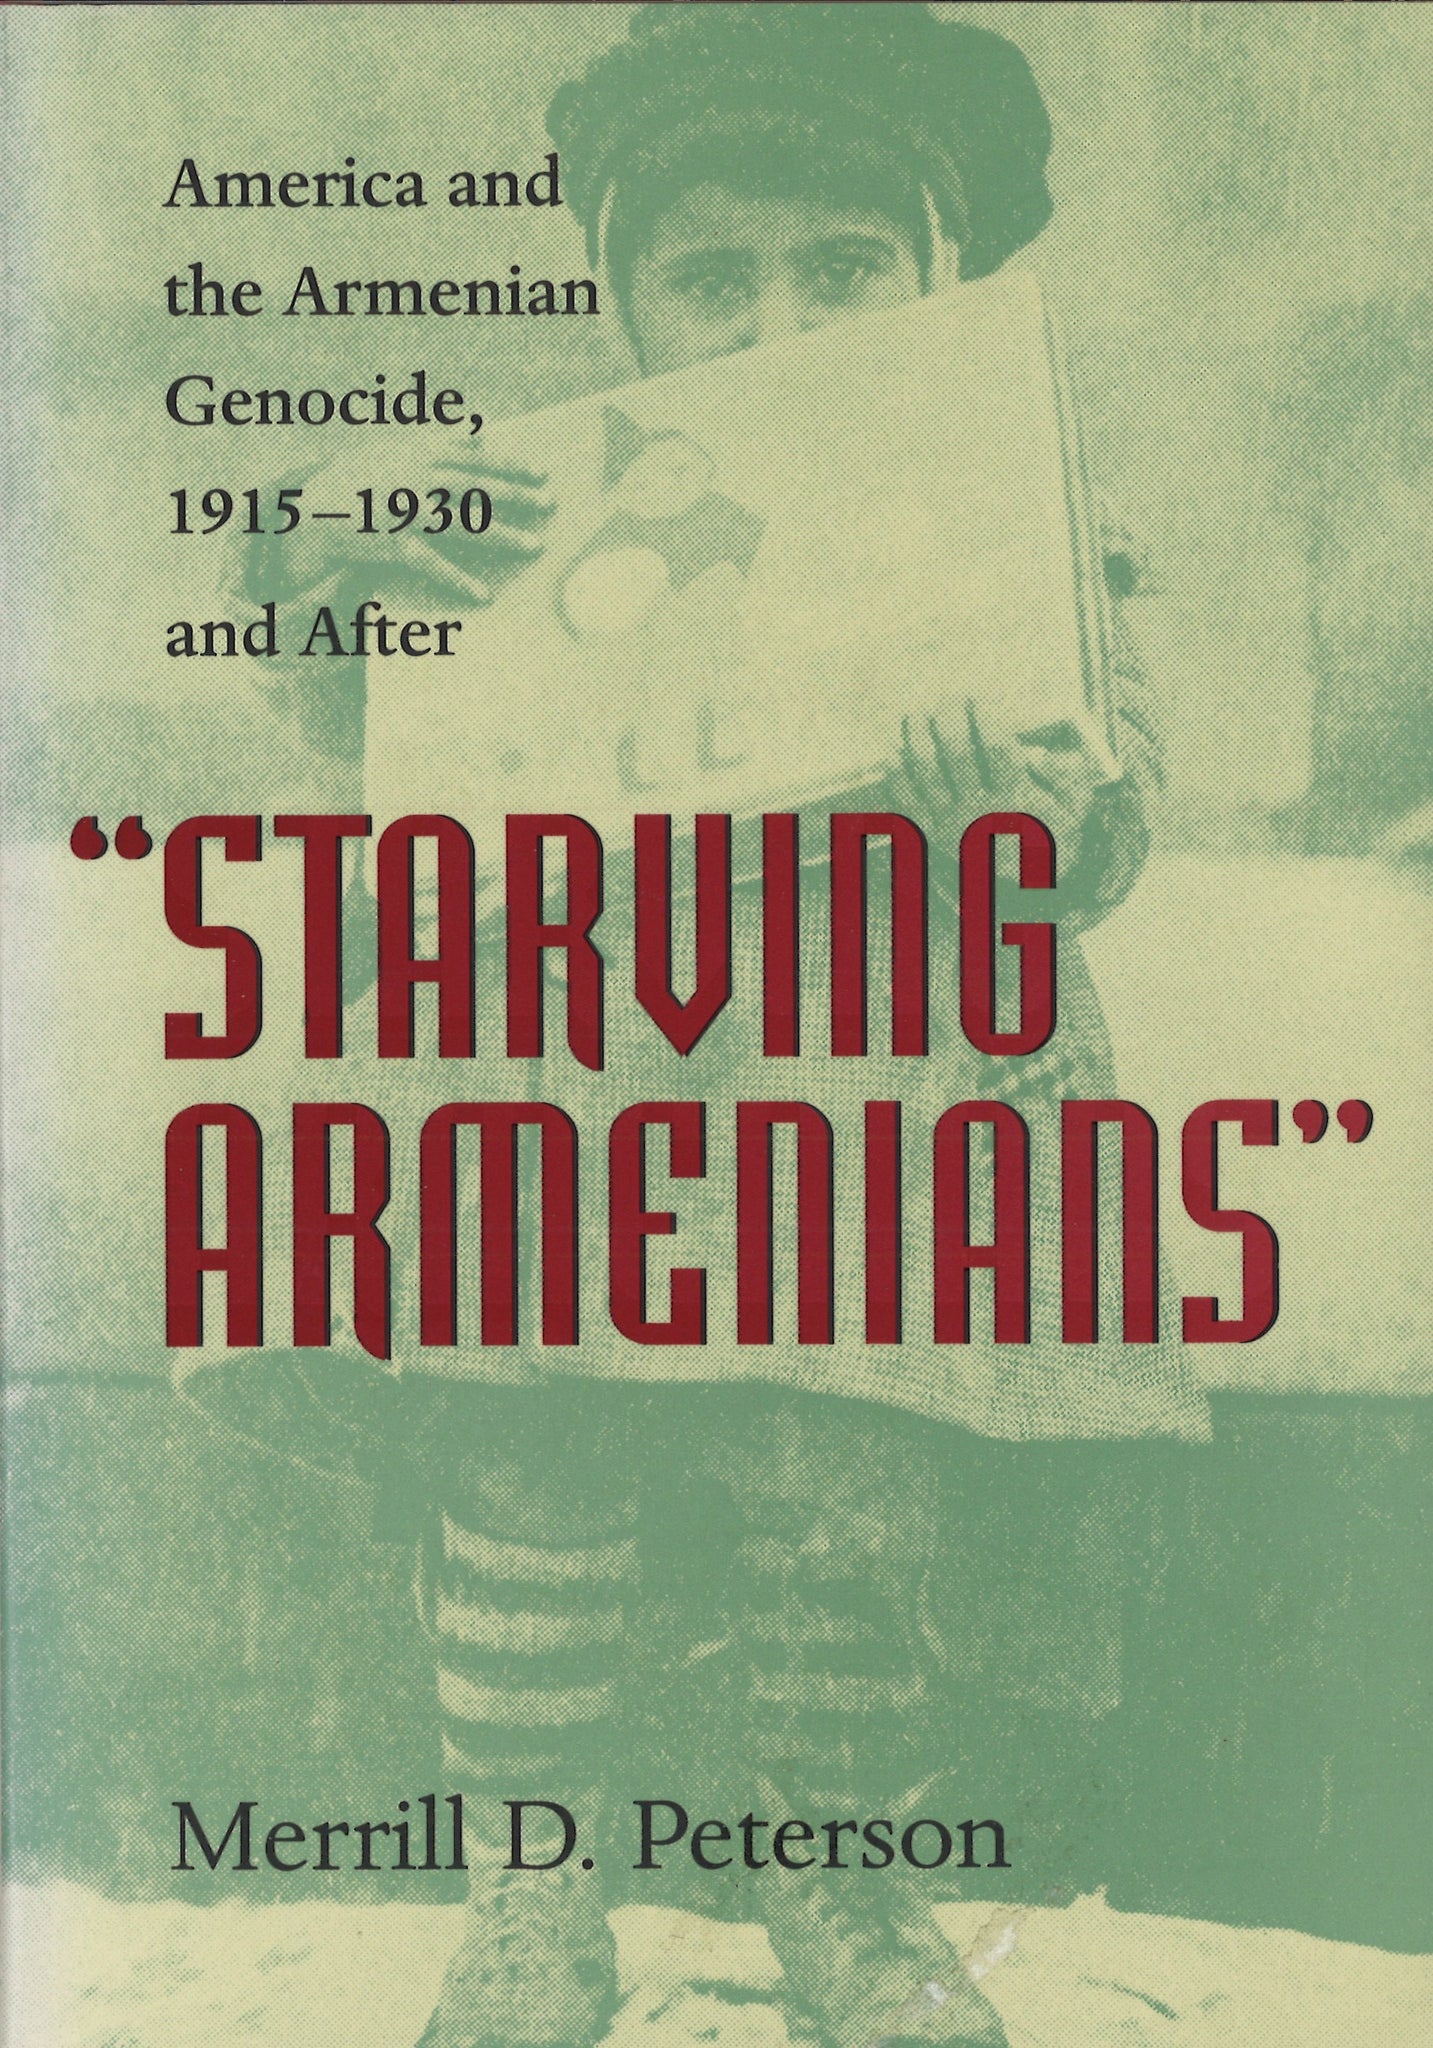 STARVING ARMENIANS: AMERICA AND THE ARMENIAN GENOCIDE, 1915- 1930 AND AFTER